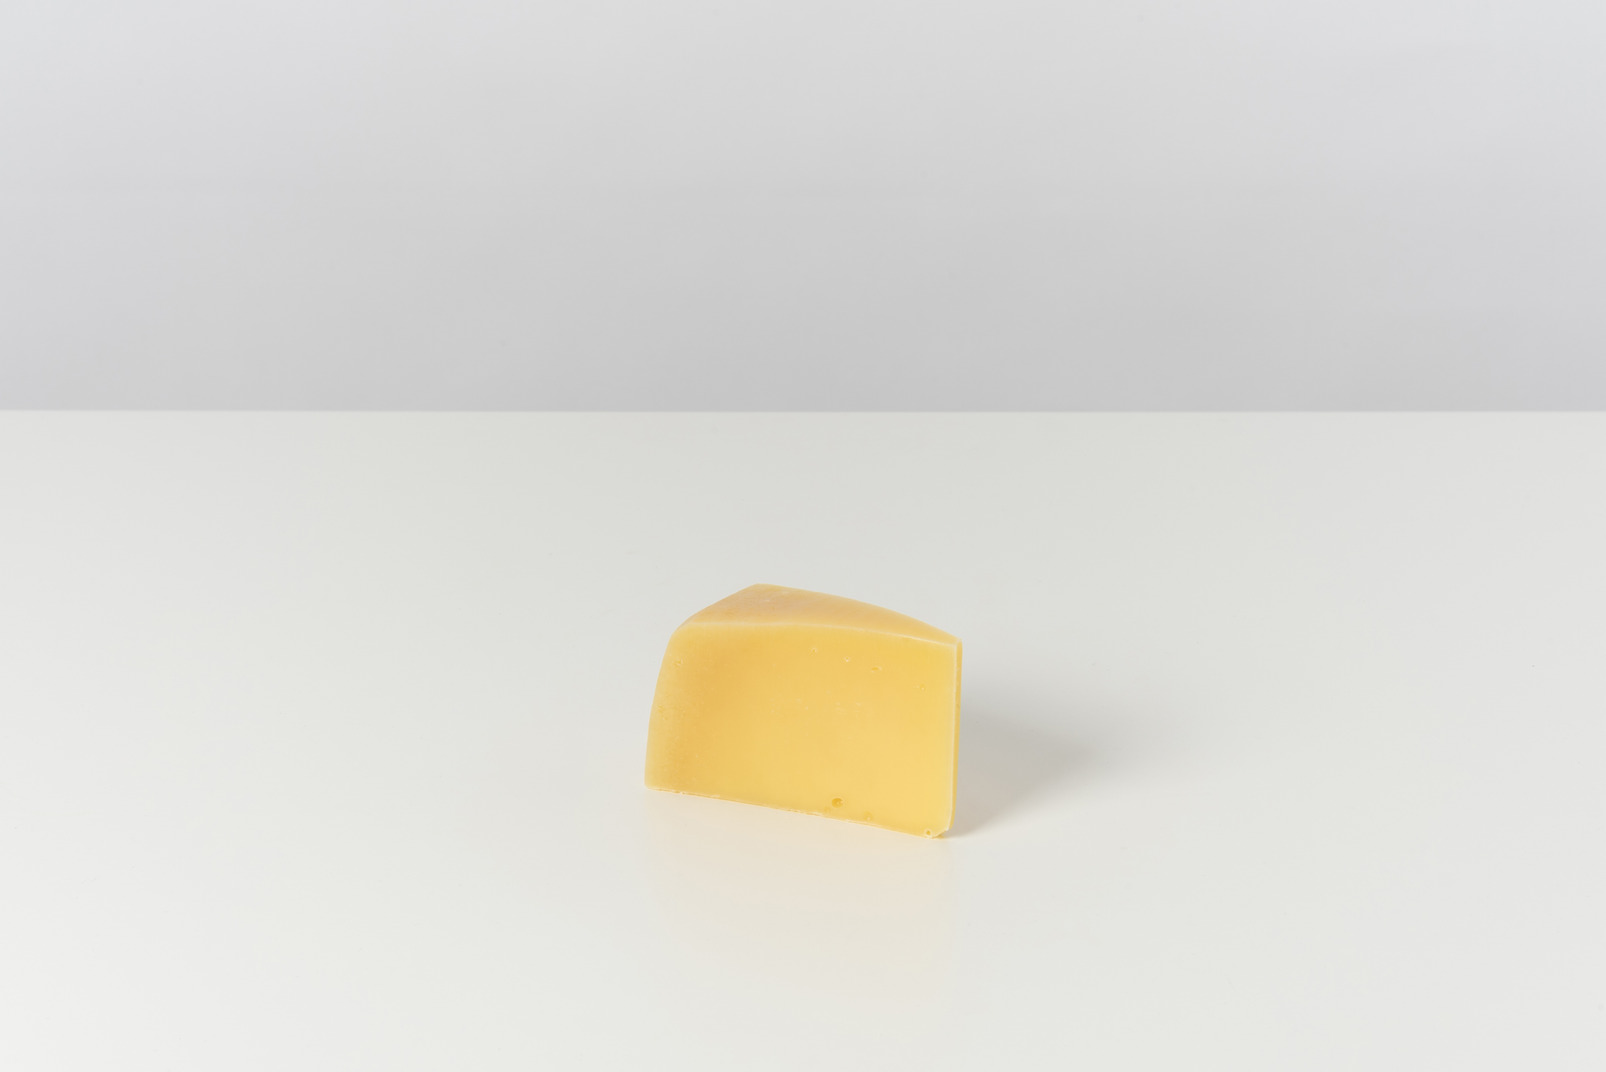 Piece of cheese on grey background